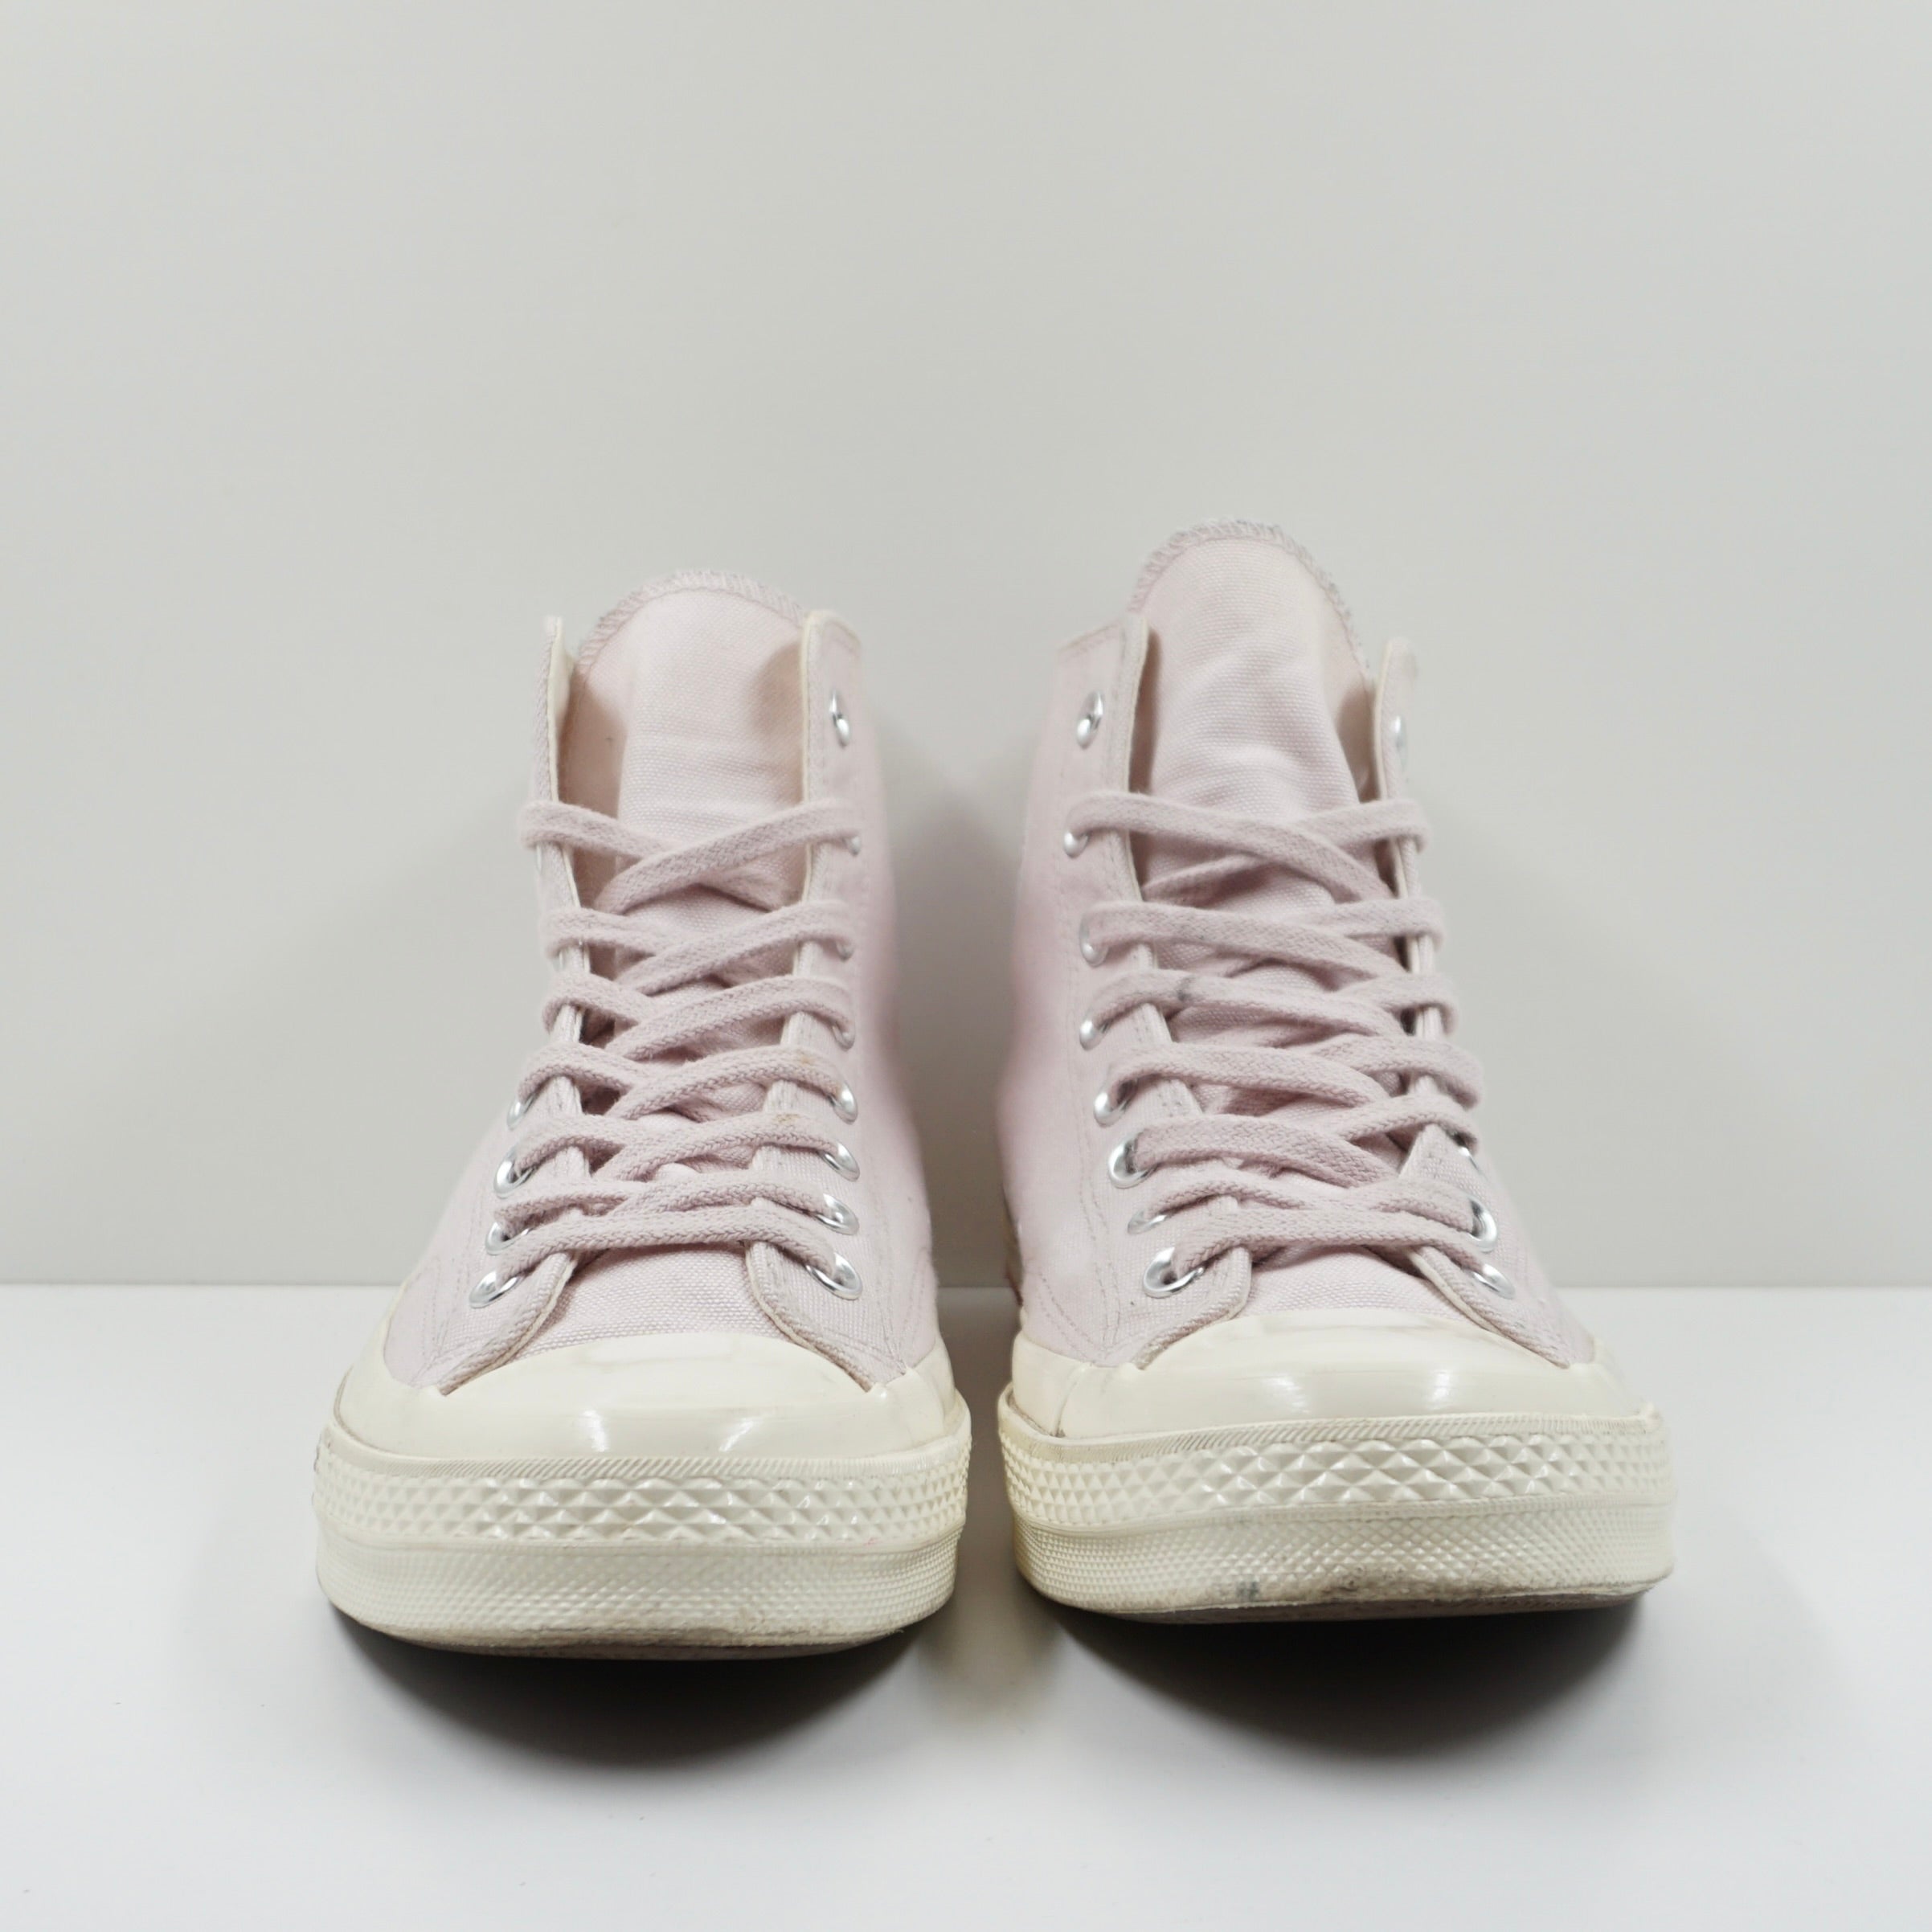 Converse Chuck Taylor All Star 70 High Heritage Court Barely Rose